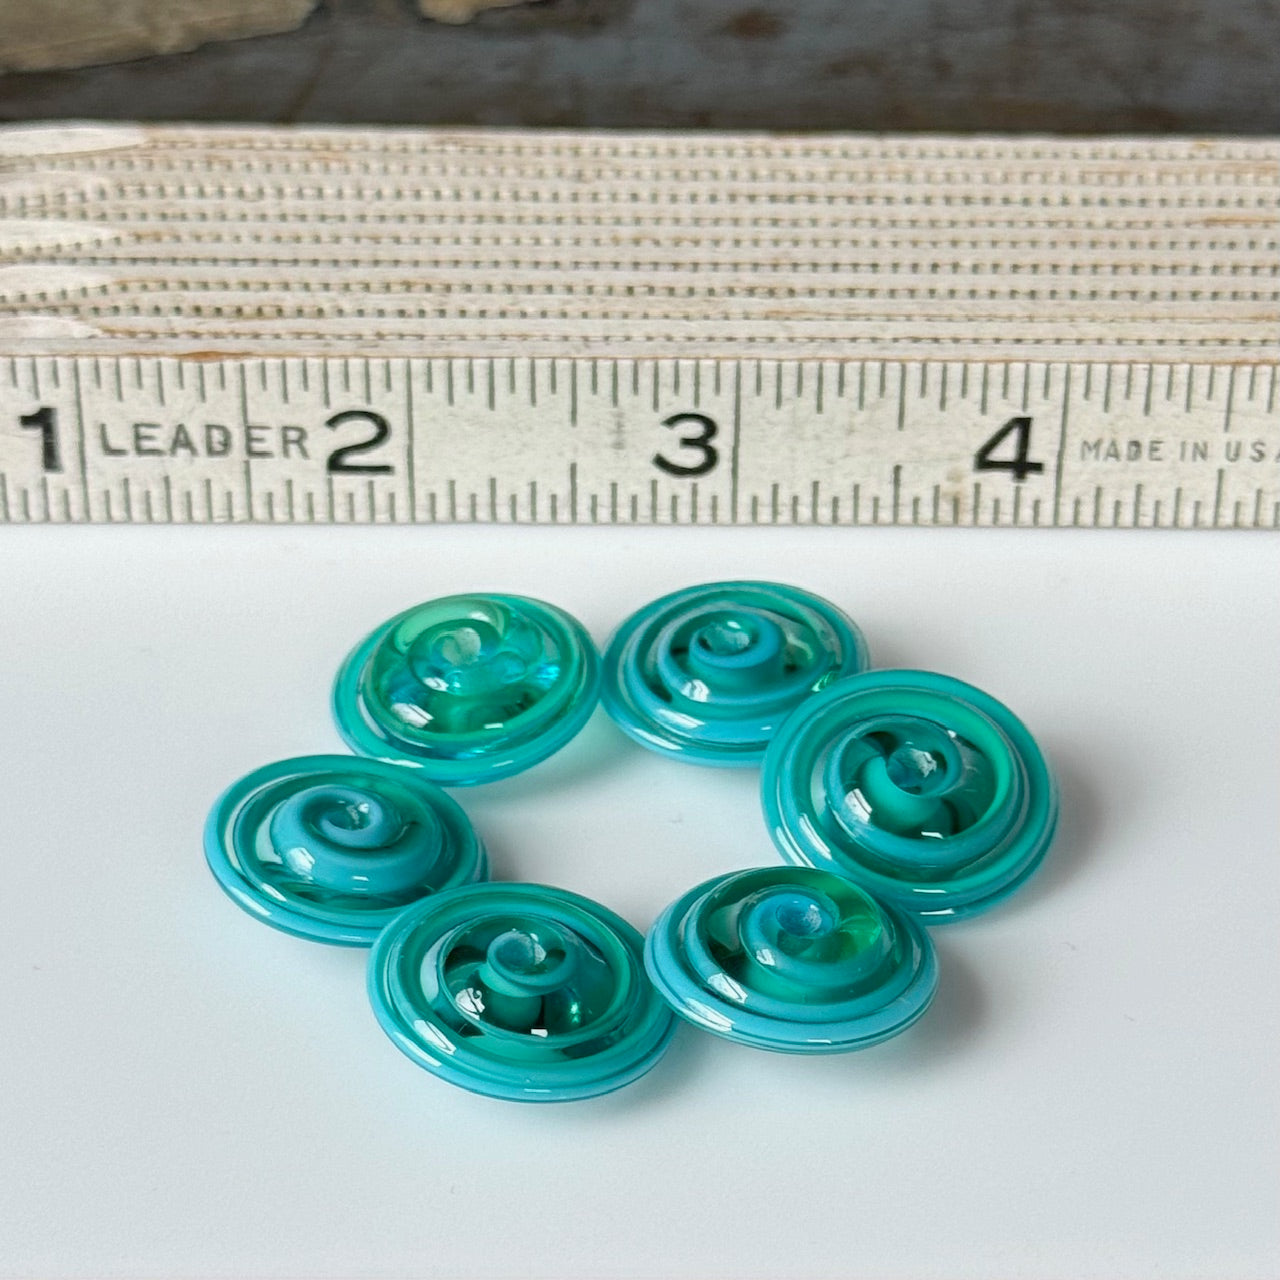 CHUNKY DISCS - Turquoise Spirals Larger